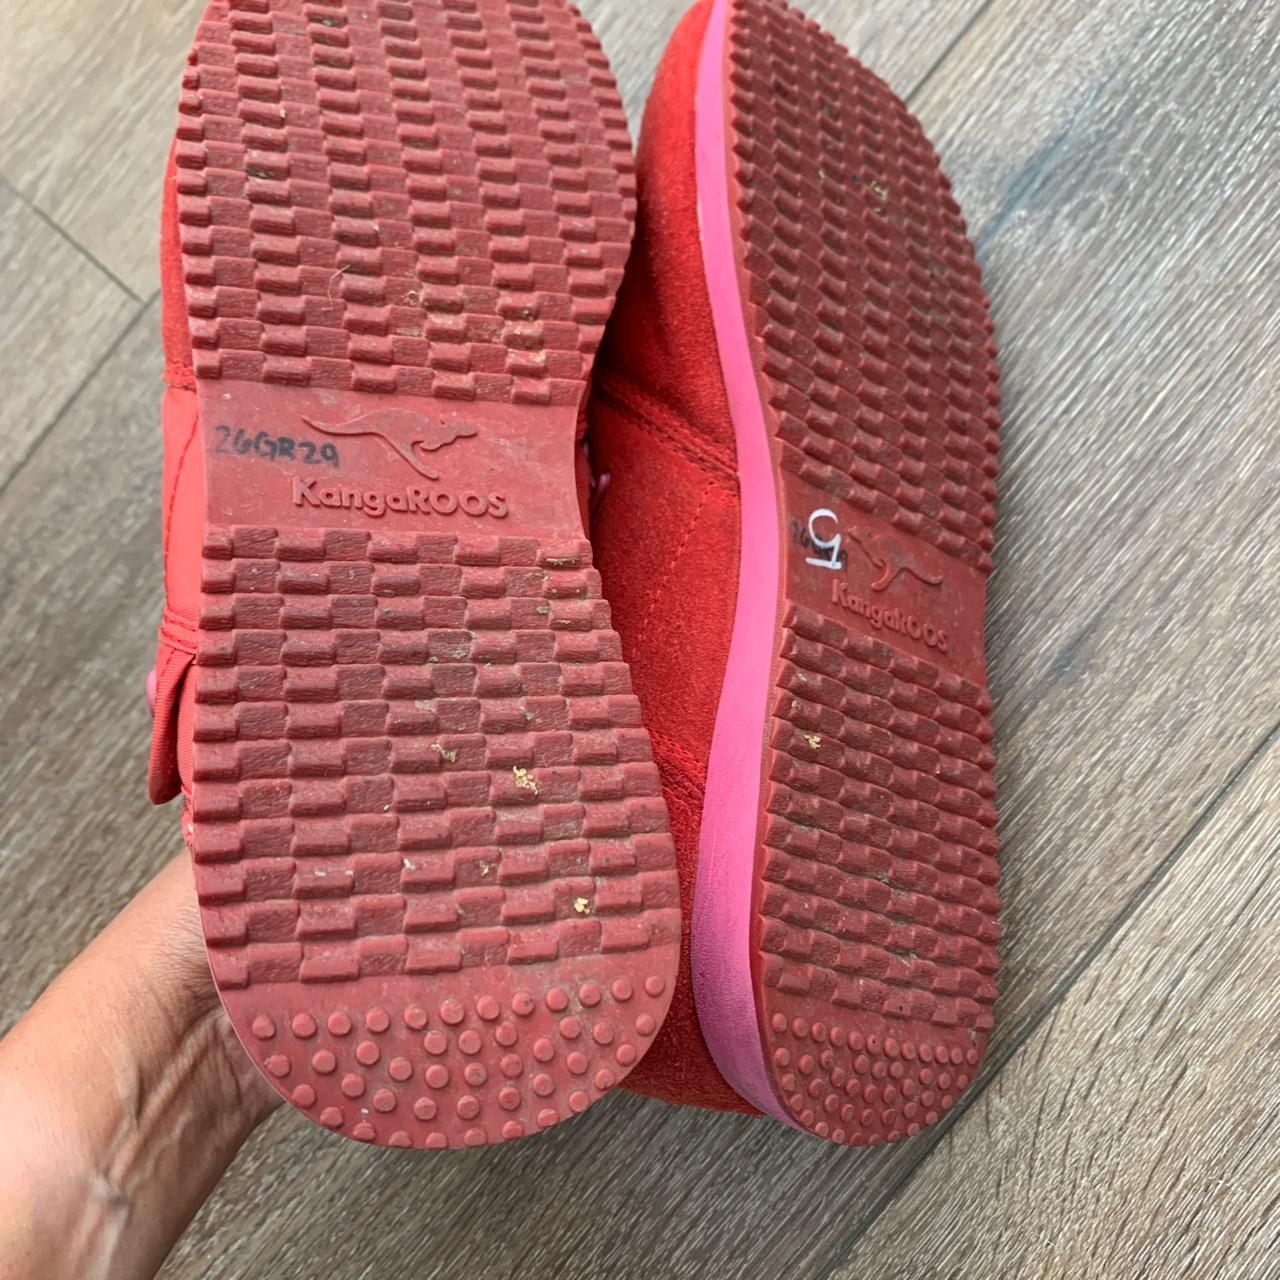 KangaROOS Women's Red and Pink Trainers (3)